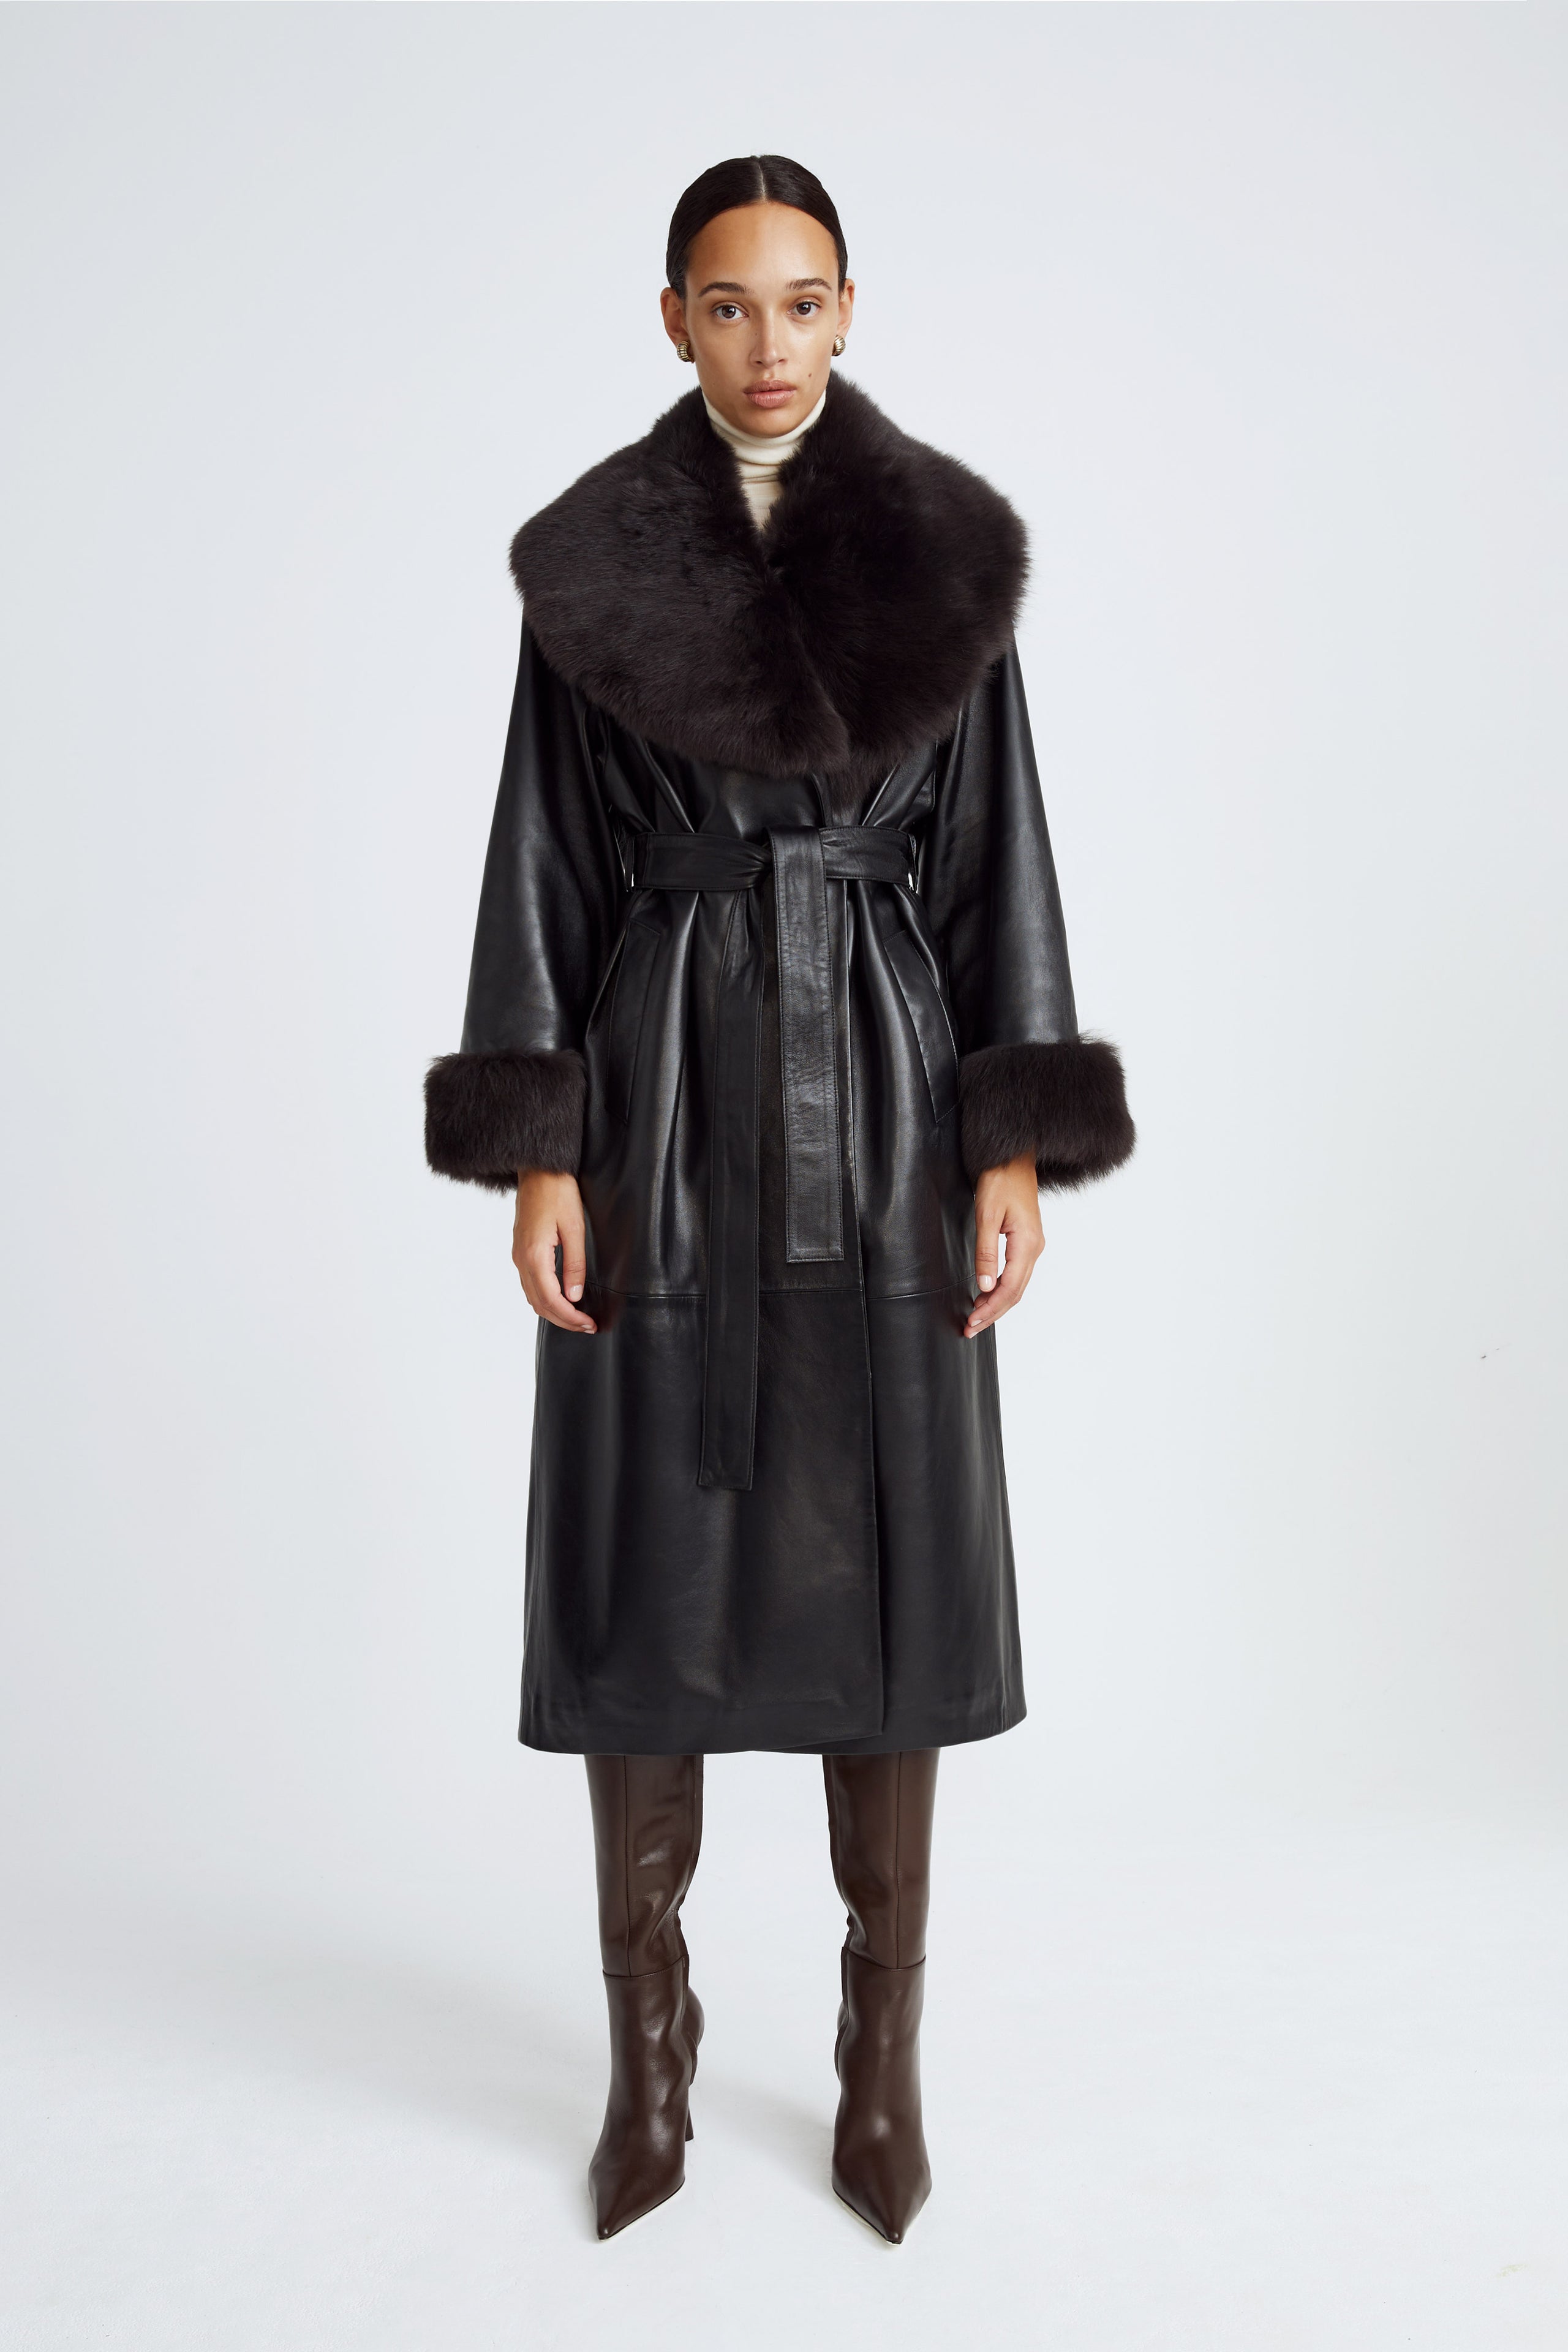 Model is wearing the Freja Black Espresso Luxurious Leather Trench Front